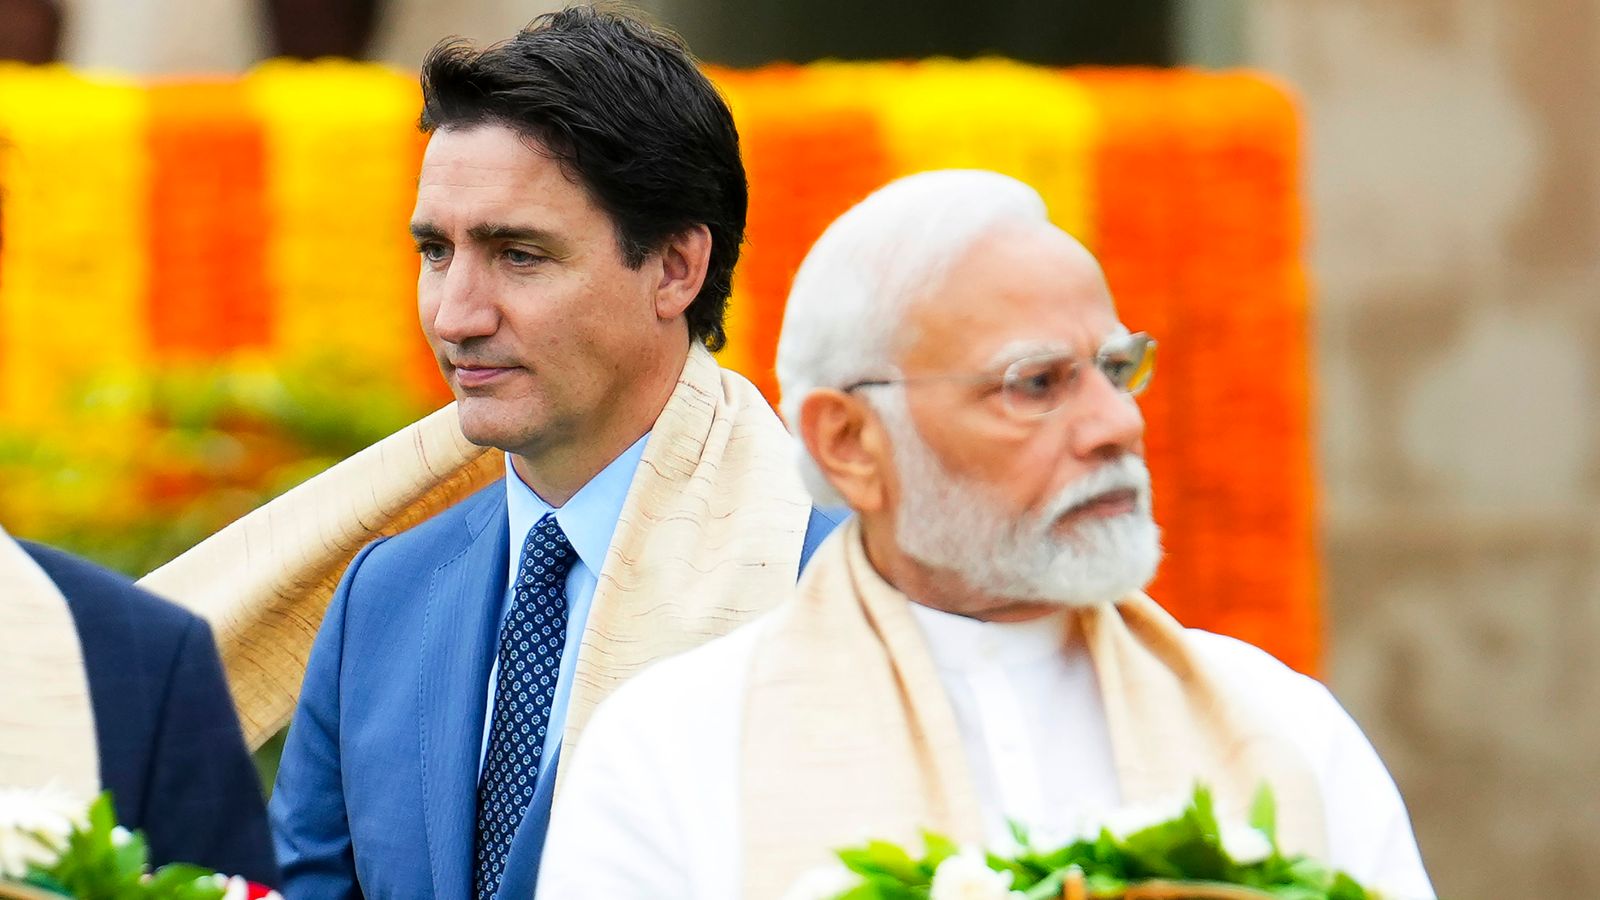 The rift between the two nations is growing, after Justin Trudeau's accusation angered Narendra Modi, India's prime minister. Pic: Sean Kilpatrick/The Canadian Press via AP